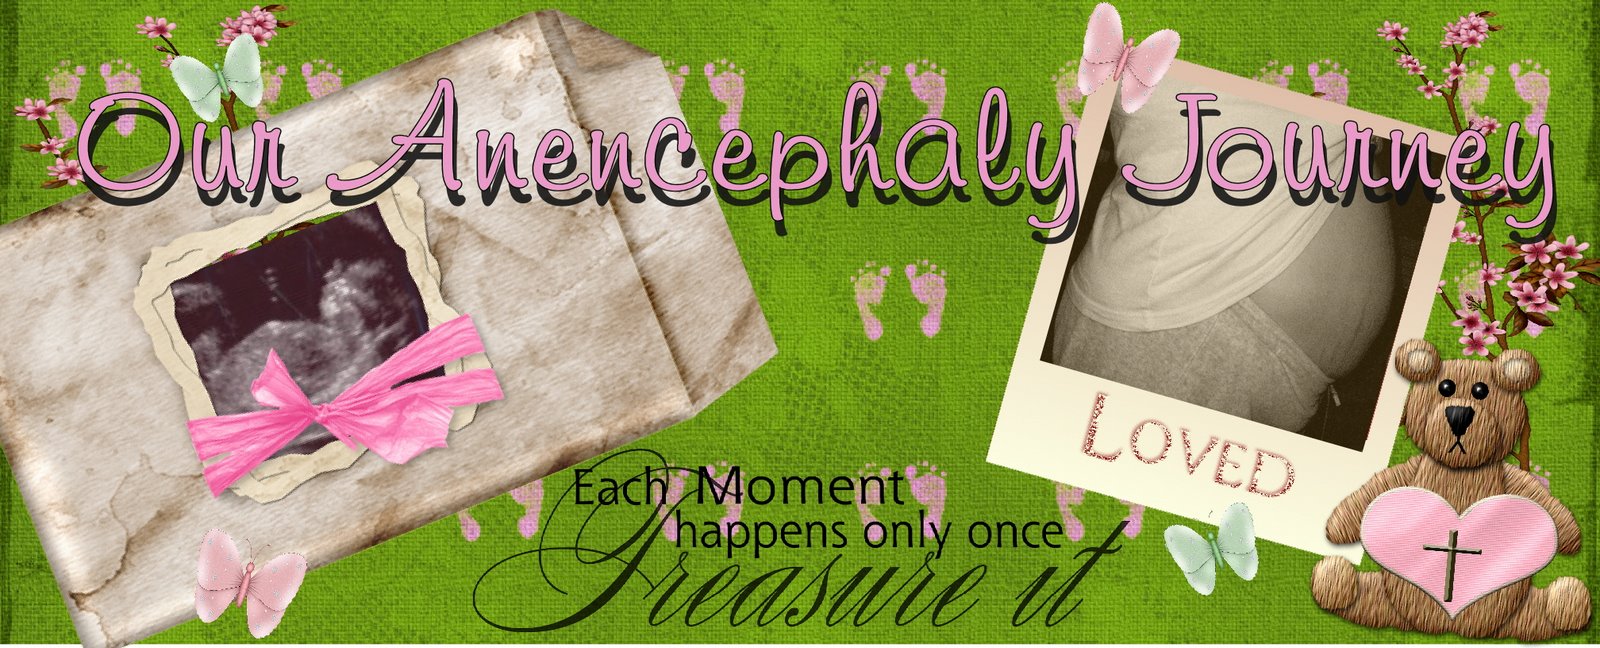 Our Anencephaly Journey